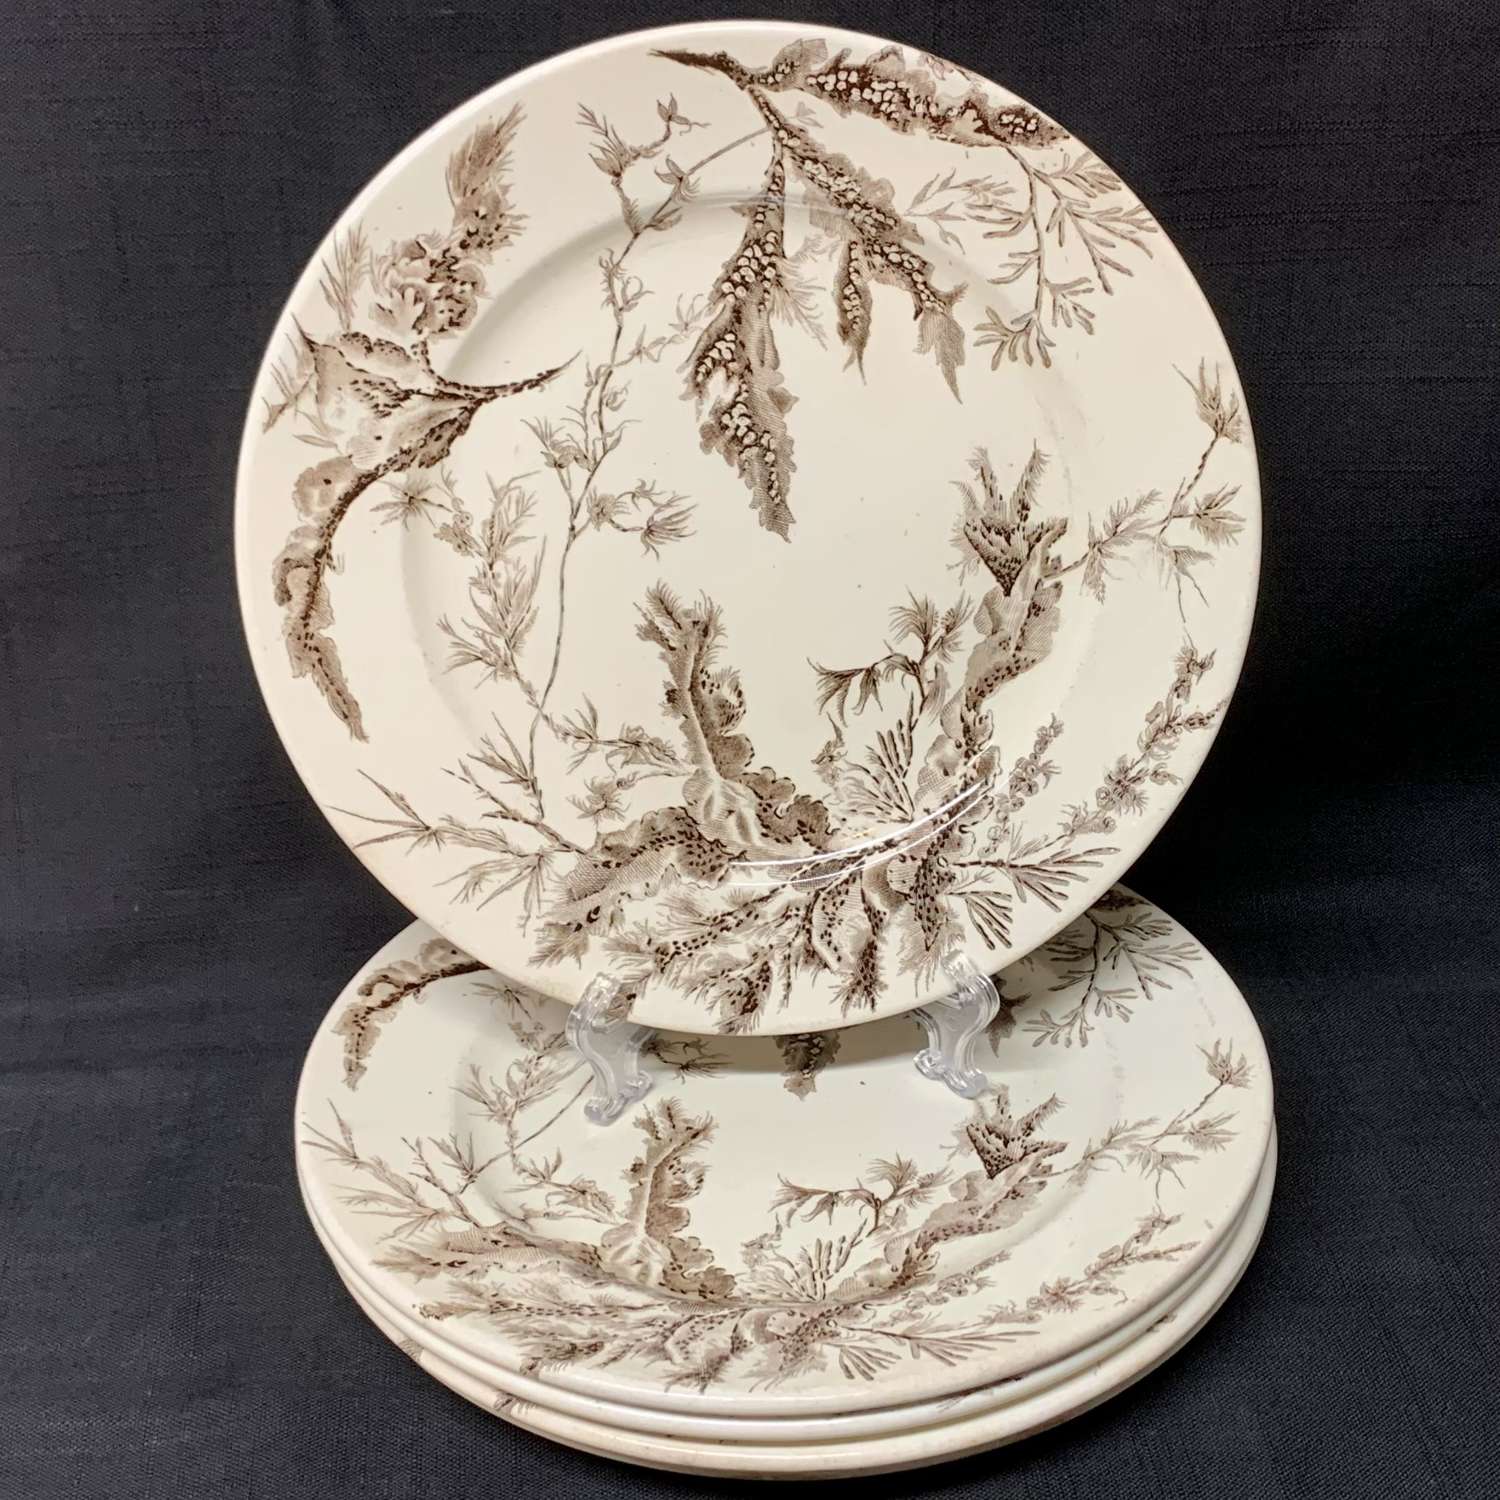 1883 ~ Brown Wedgwood Supper Plates ~ SEAWEED 1883 15 available